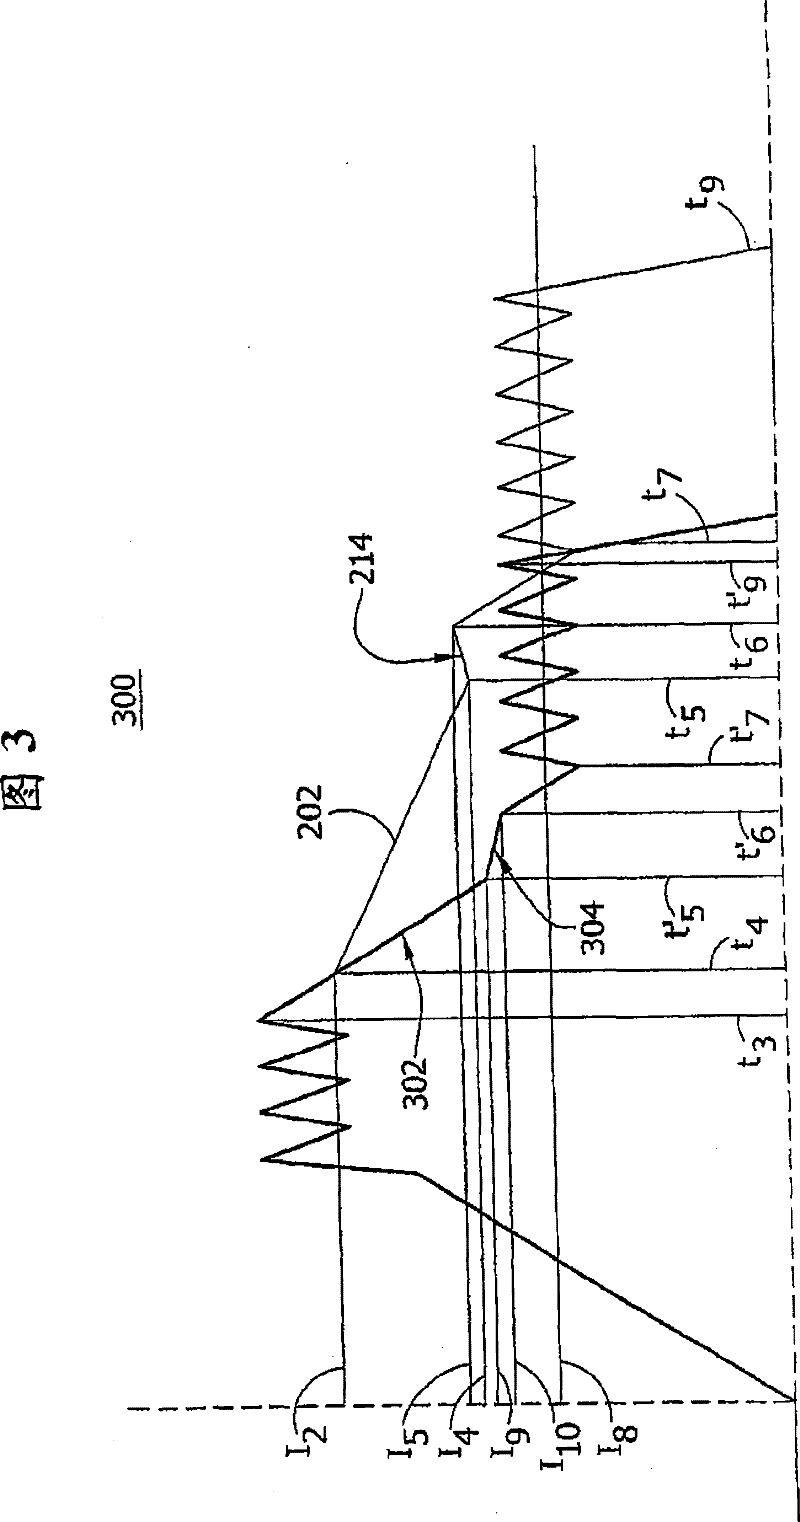 Apparatus and method for accurate detection of locomotive fuel injection pump solenoid closure